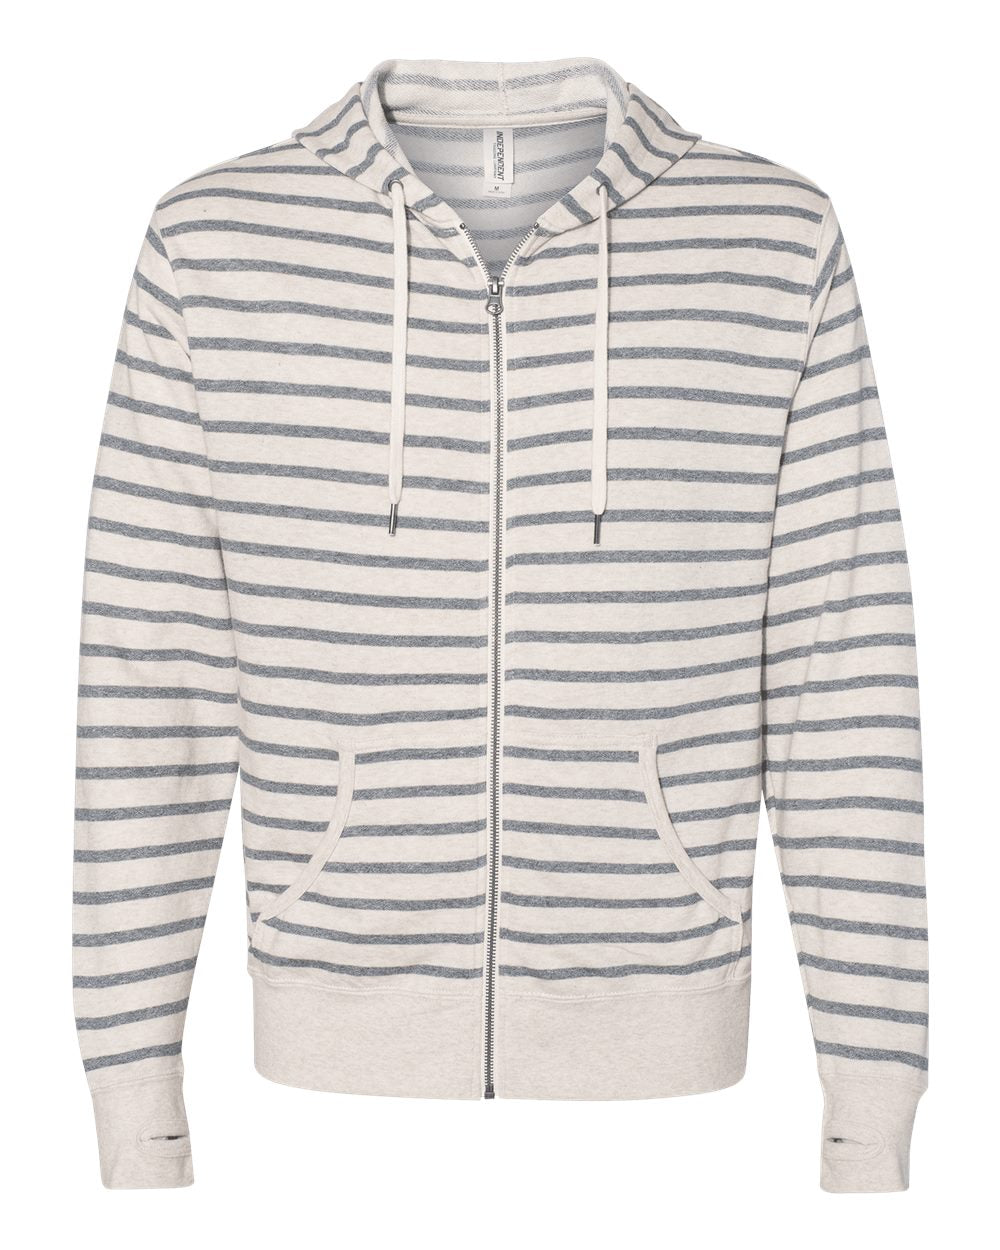 Independent Trading Co. - Heathered French Terry Full-Zip Hooded Sweatshirt